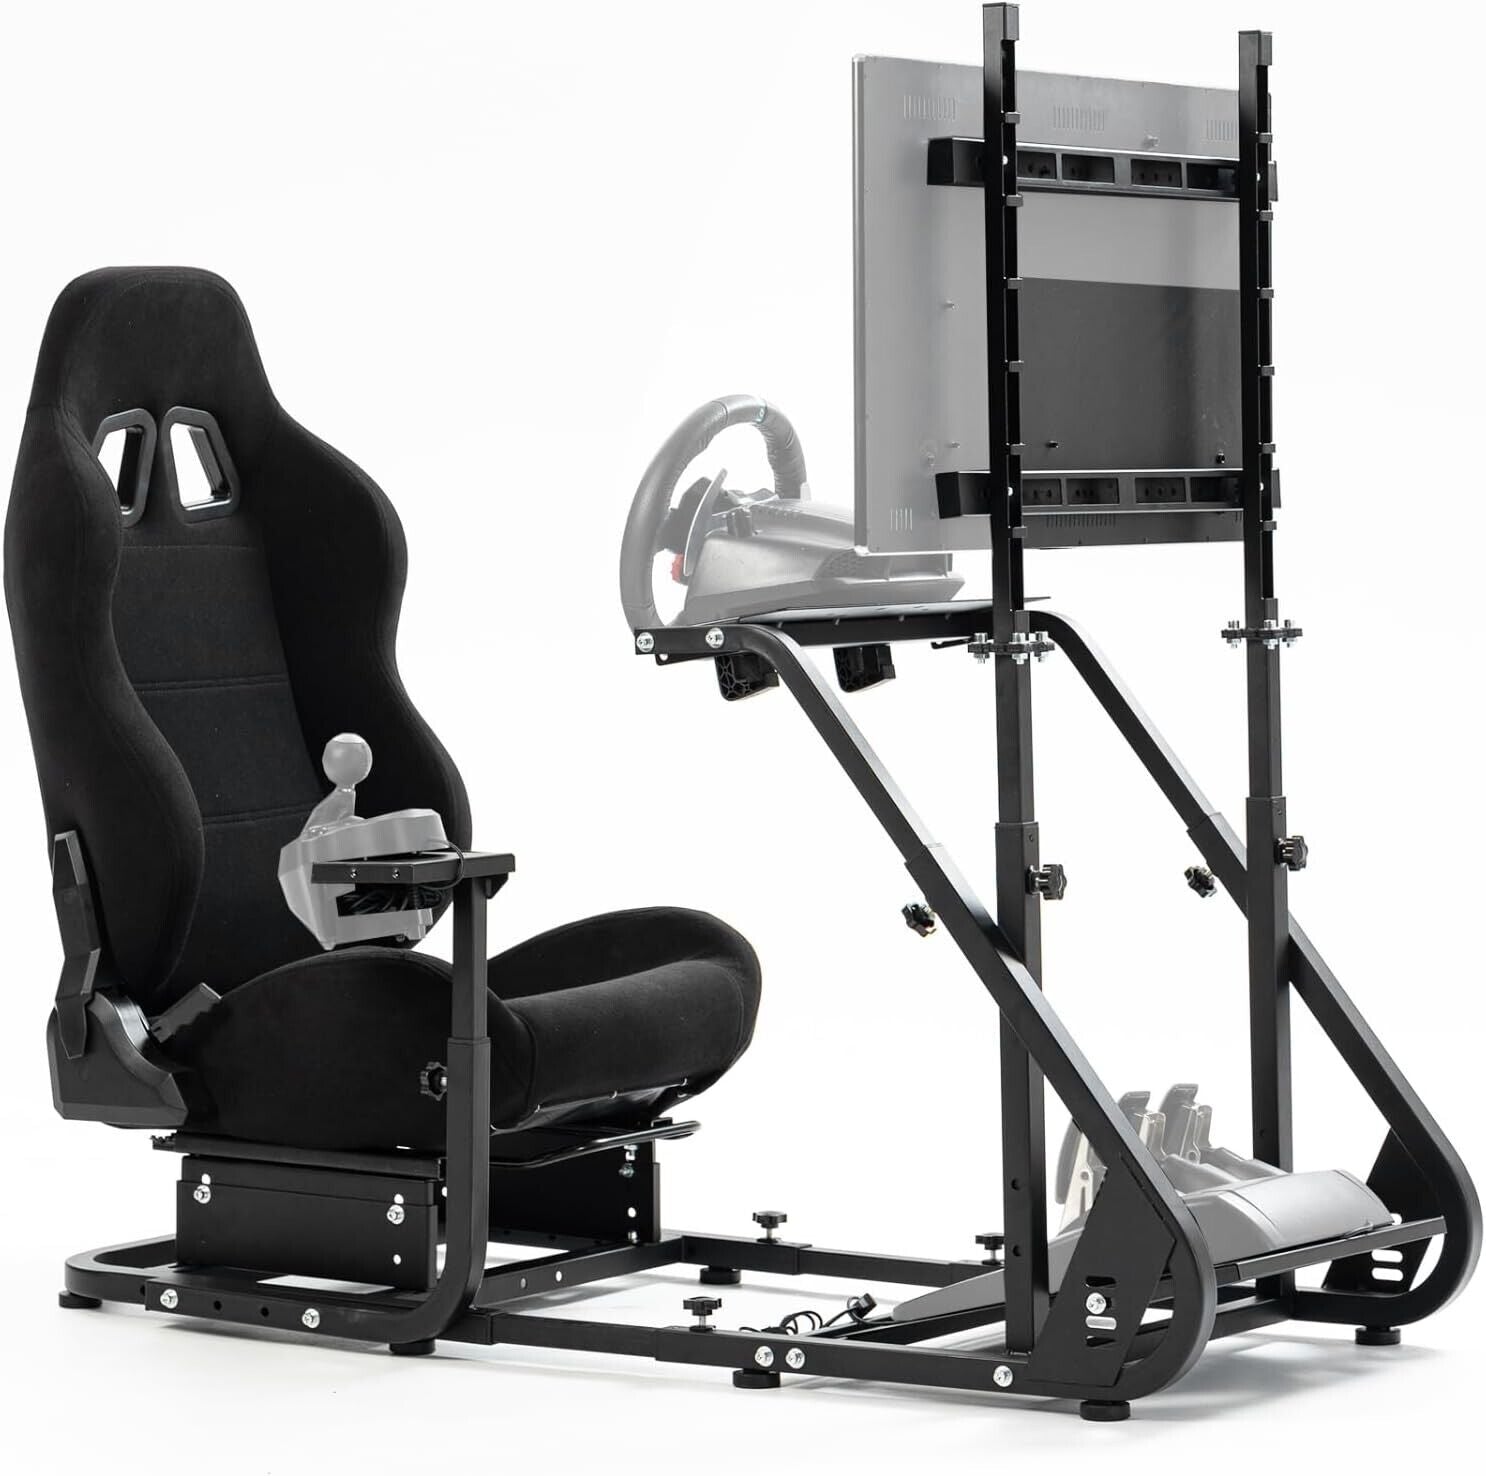 HIGH-END Driving Game Simulator Racing Frame & Seat with Monitor Stand - For Steering Wheel Pedals Xbox PS Playstation PC Console F1